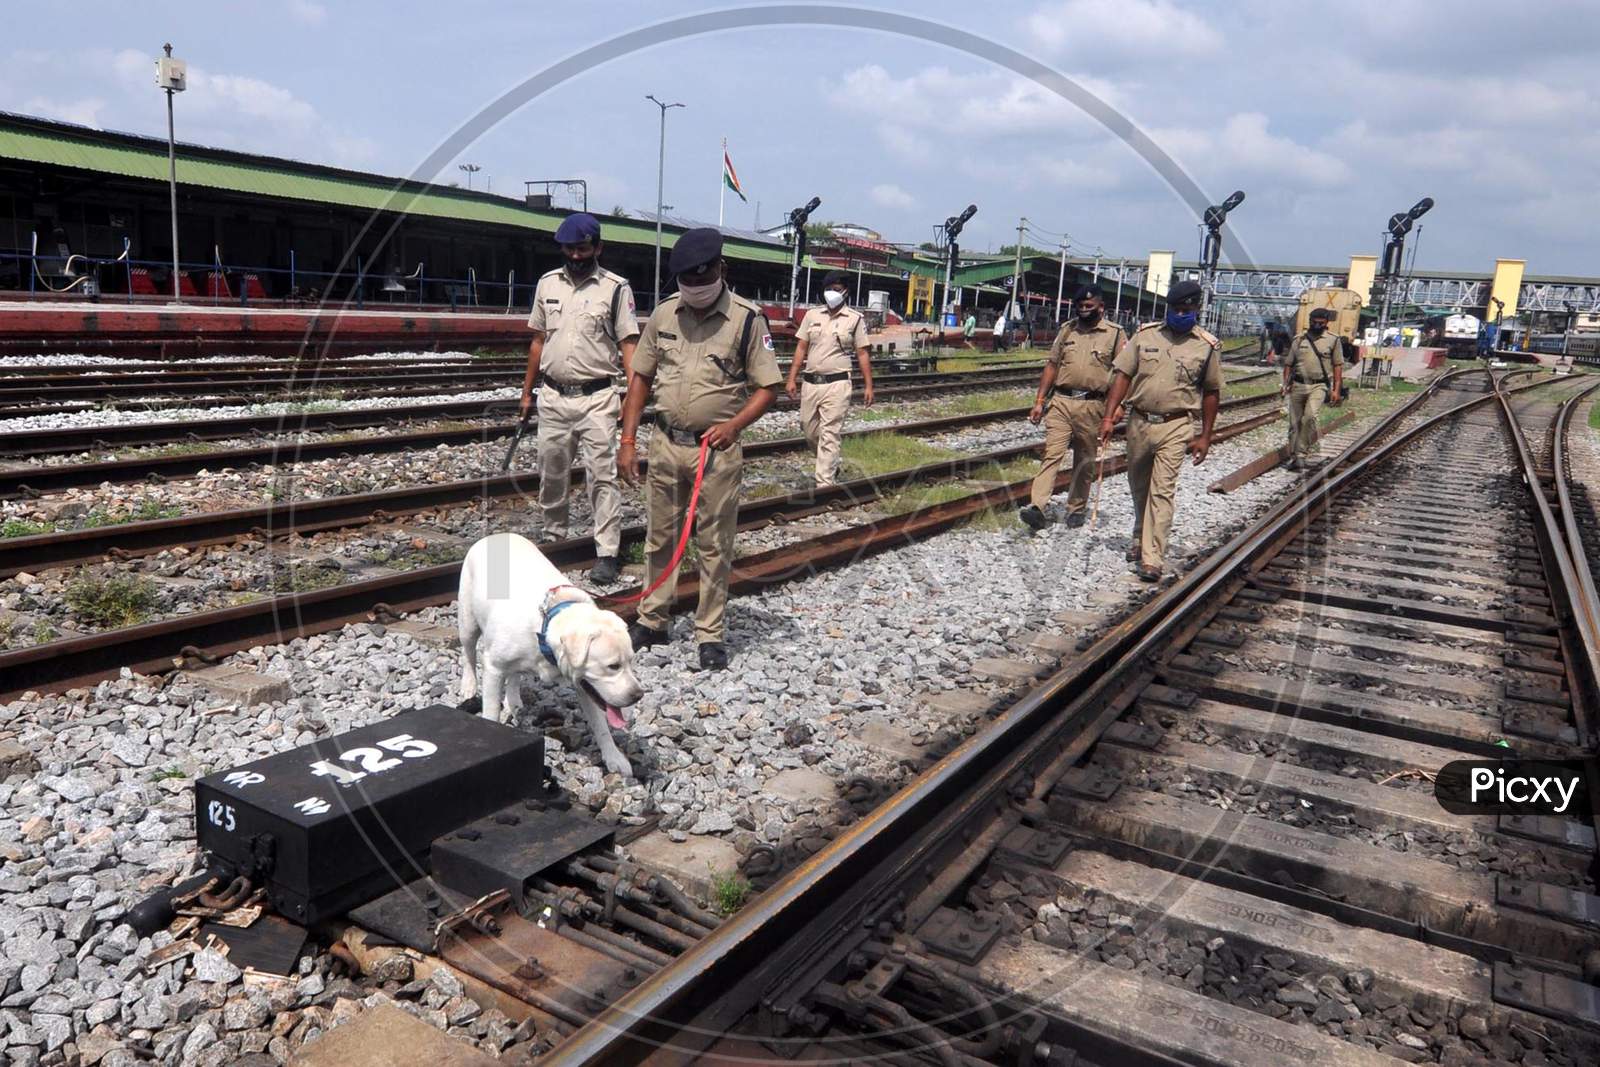 Railway Police Force (Rpf) Personnel Inspect The Tracks And Platform Along With A Sniffer Dog, Ahead Of The Independence Day Celebrations, In Guwahati On Monday, Aug 10, 2020.